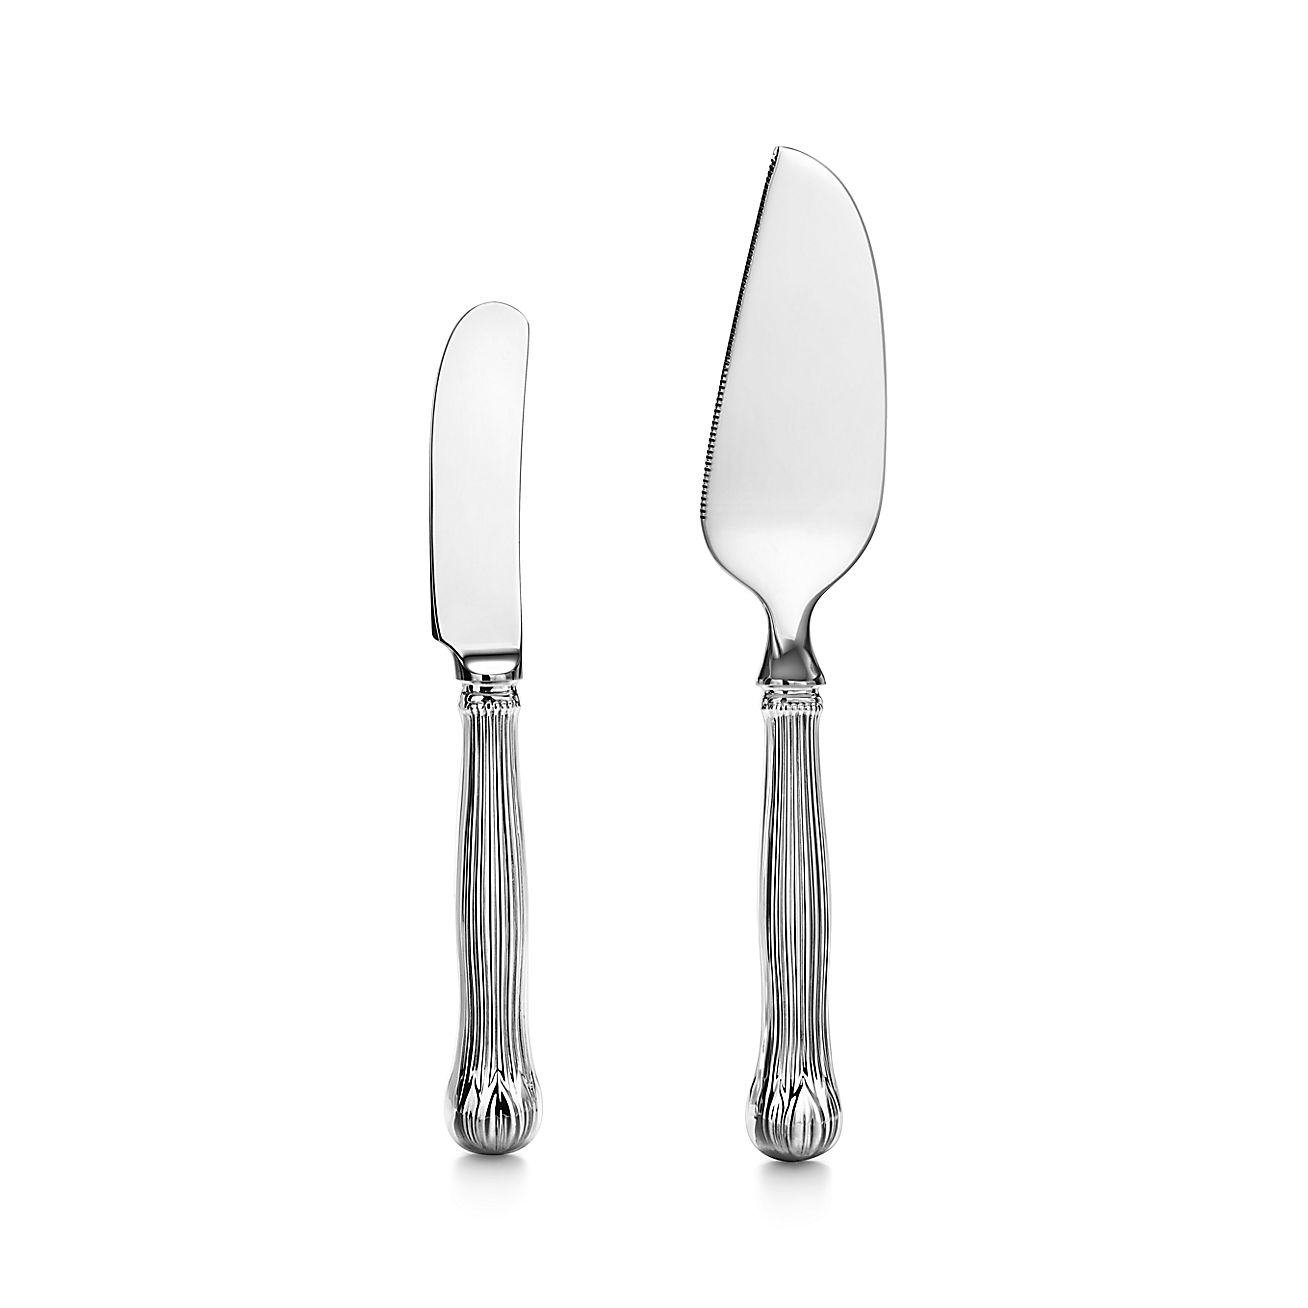 Lotus cheese spreader and server in sterling silver. | Tiffany & Co.